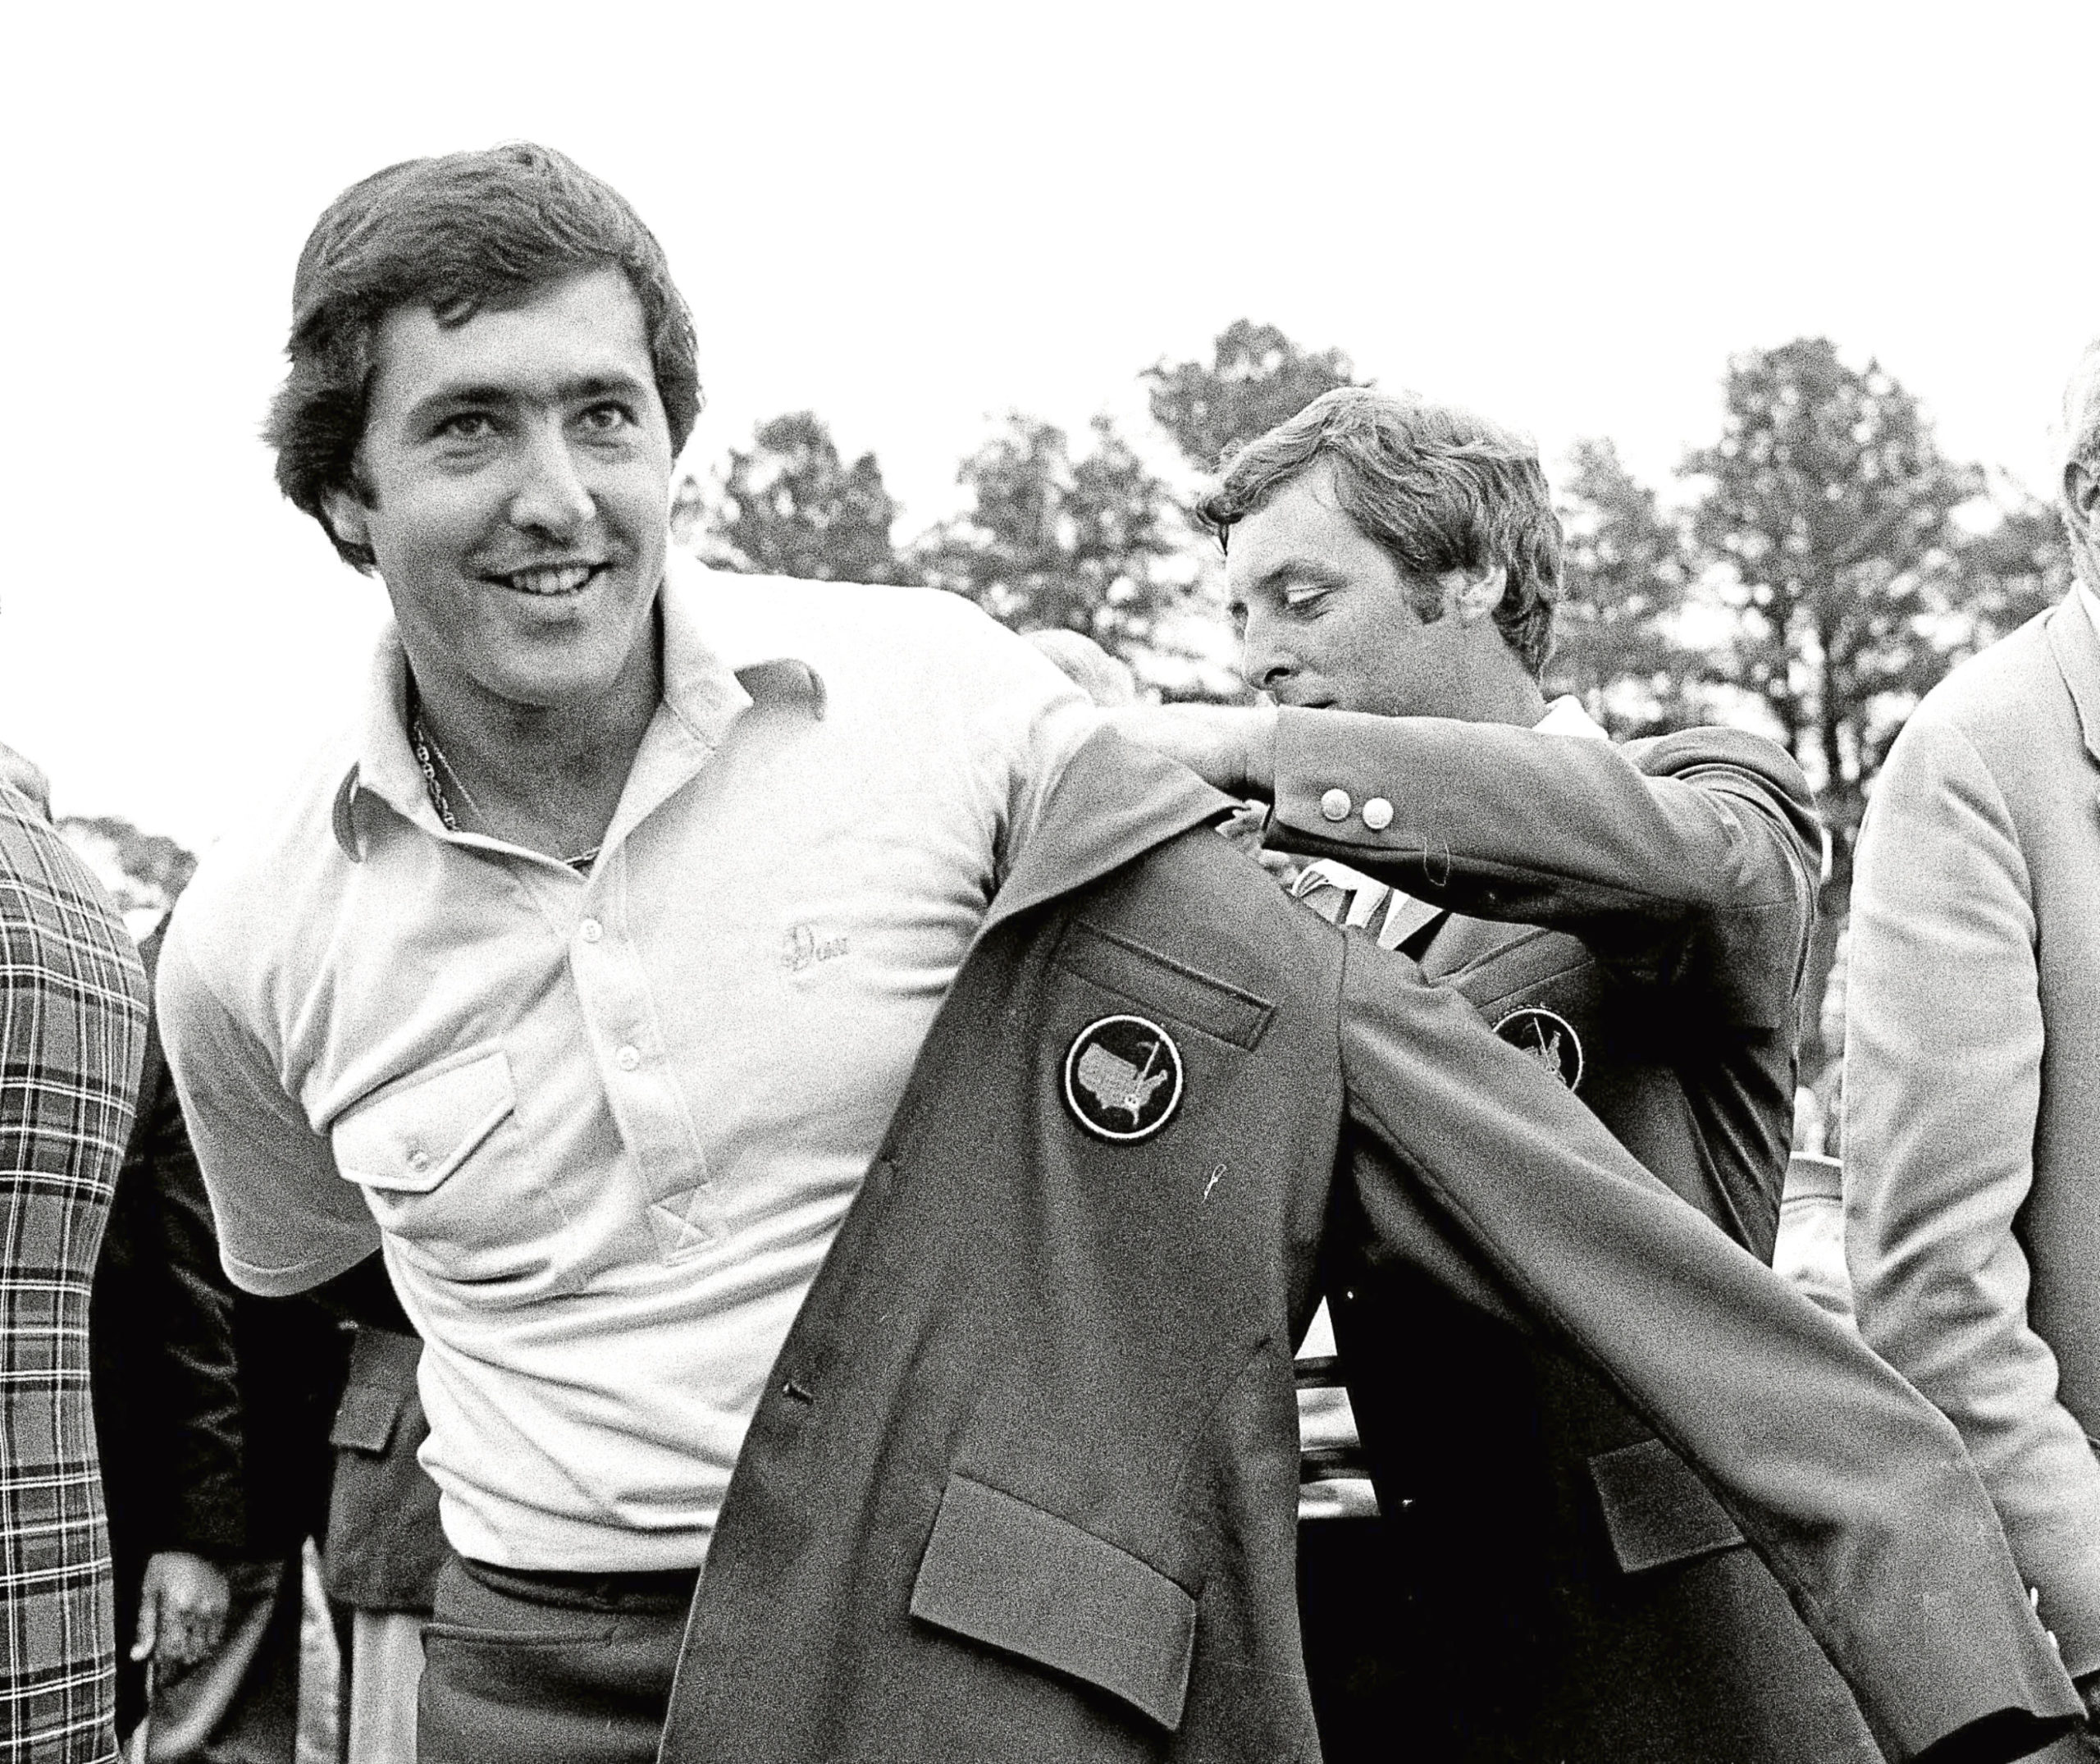 Mandatory Credit: Photo by Uncredited/AP/Shutterstock (6601920a)
Seve Ballesteros Seve Ballesteros of Spain, left, is helped with his Masters green jacket by the previous year's winner, Fuzzy Zoeller, right, after winning the 1980 Masters, in Augusta, Ga. Ballesteros had a 10-shot lead going to the back nine in the 1980 Masters before throwing away shots. His six-shot win was one of the most dominant Masters victories
Masters Five Blowouts Golf, Augusta, USA